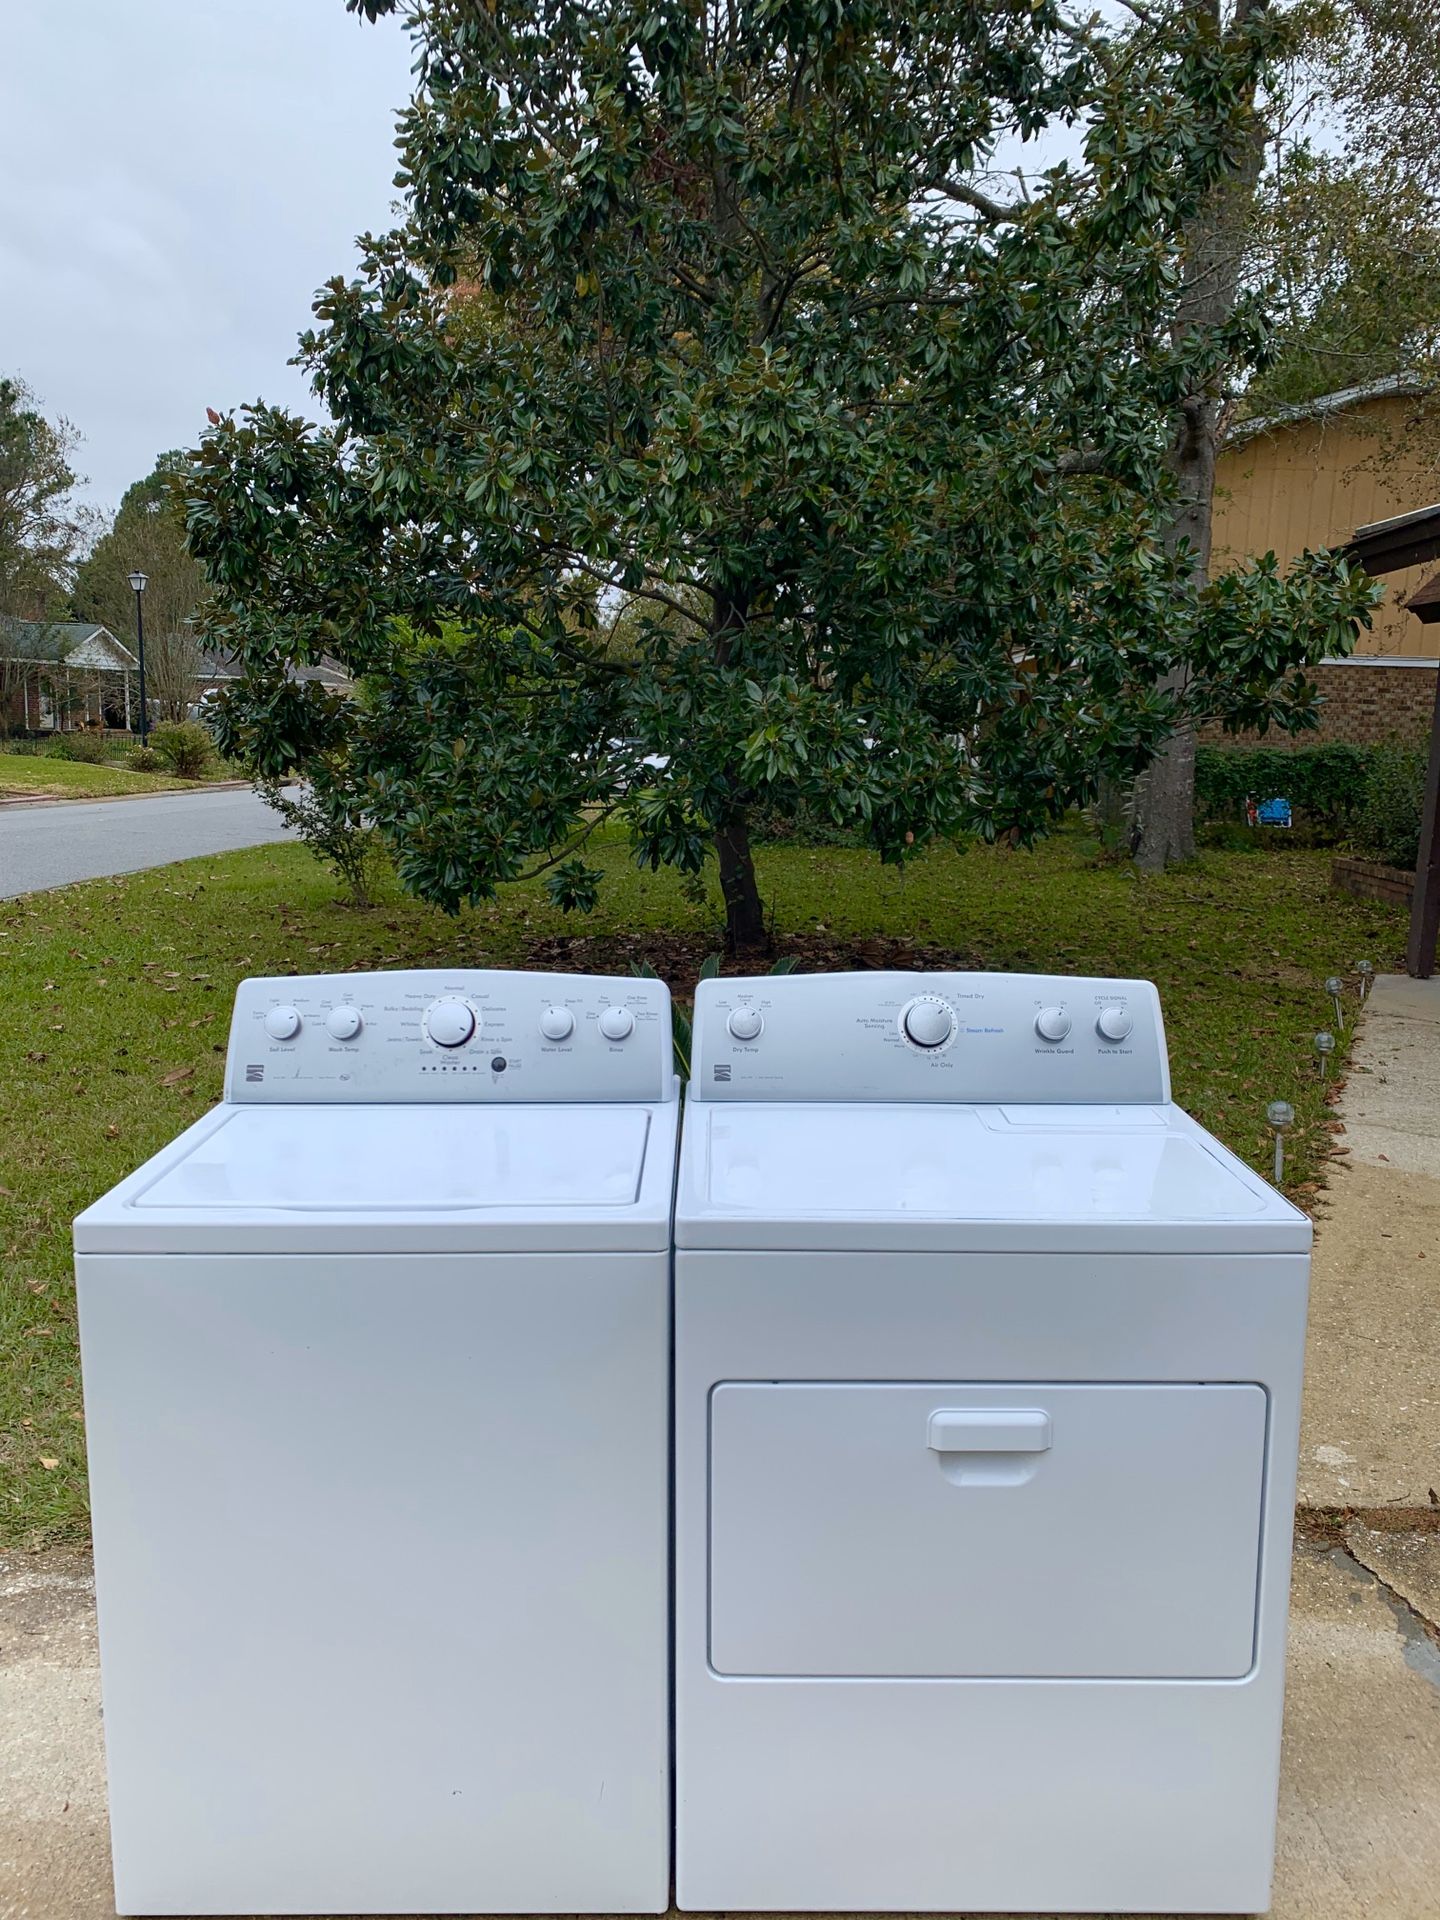 🌊Barely Used Matching Kenmore Washer and Dryer Set Available🌊